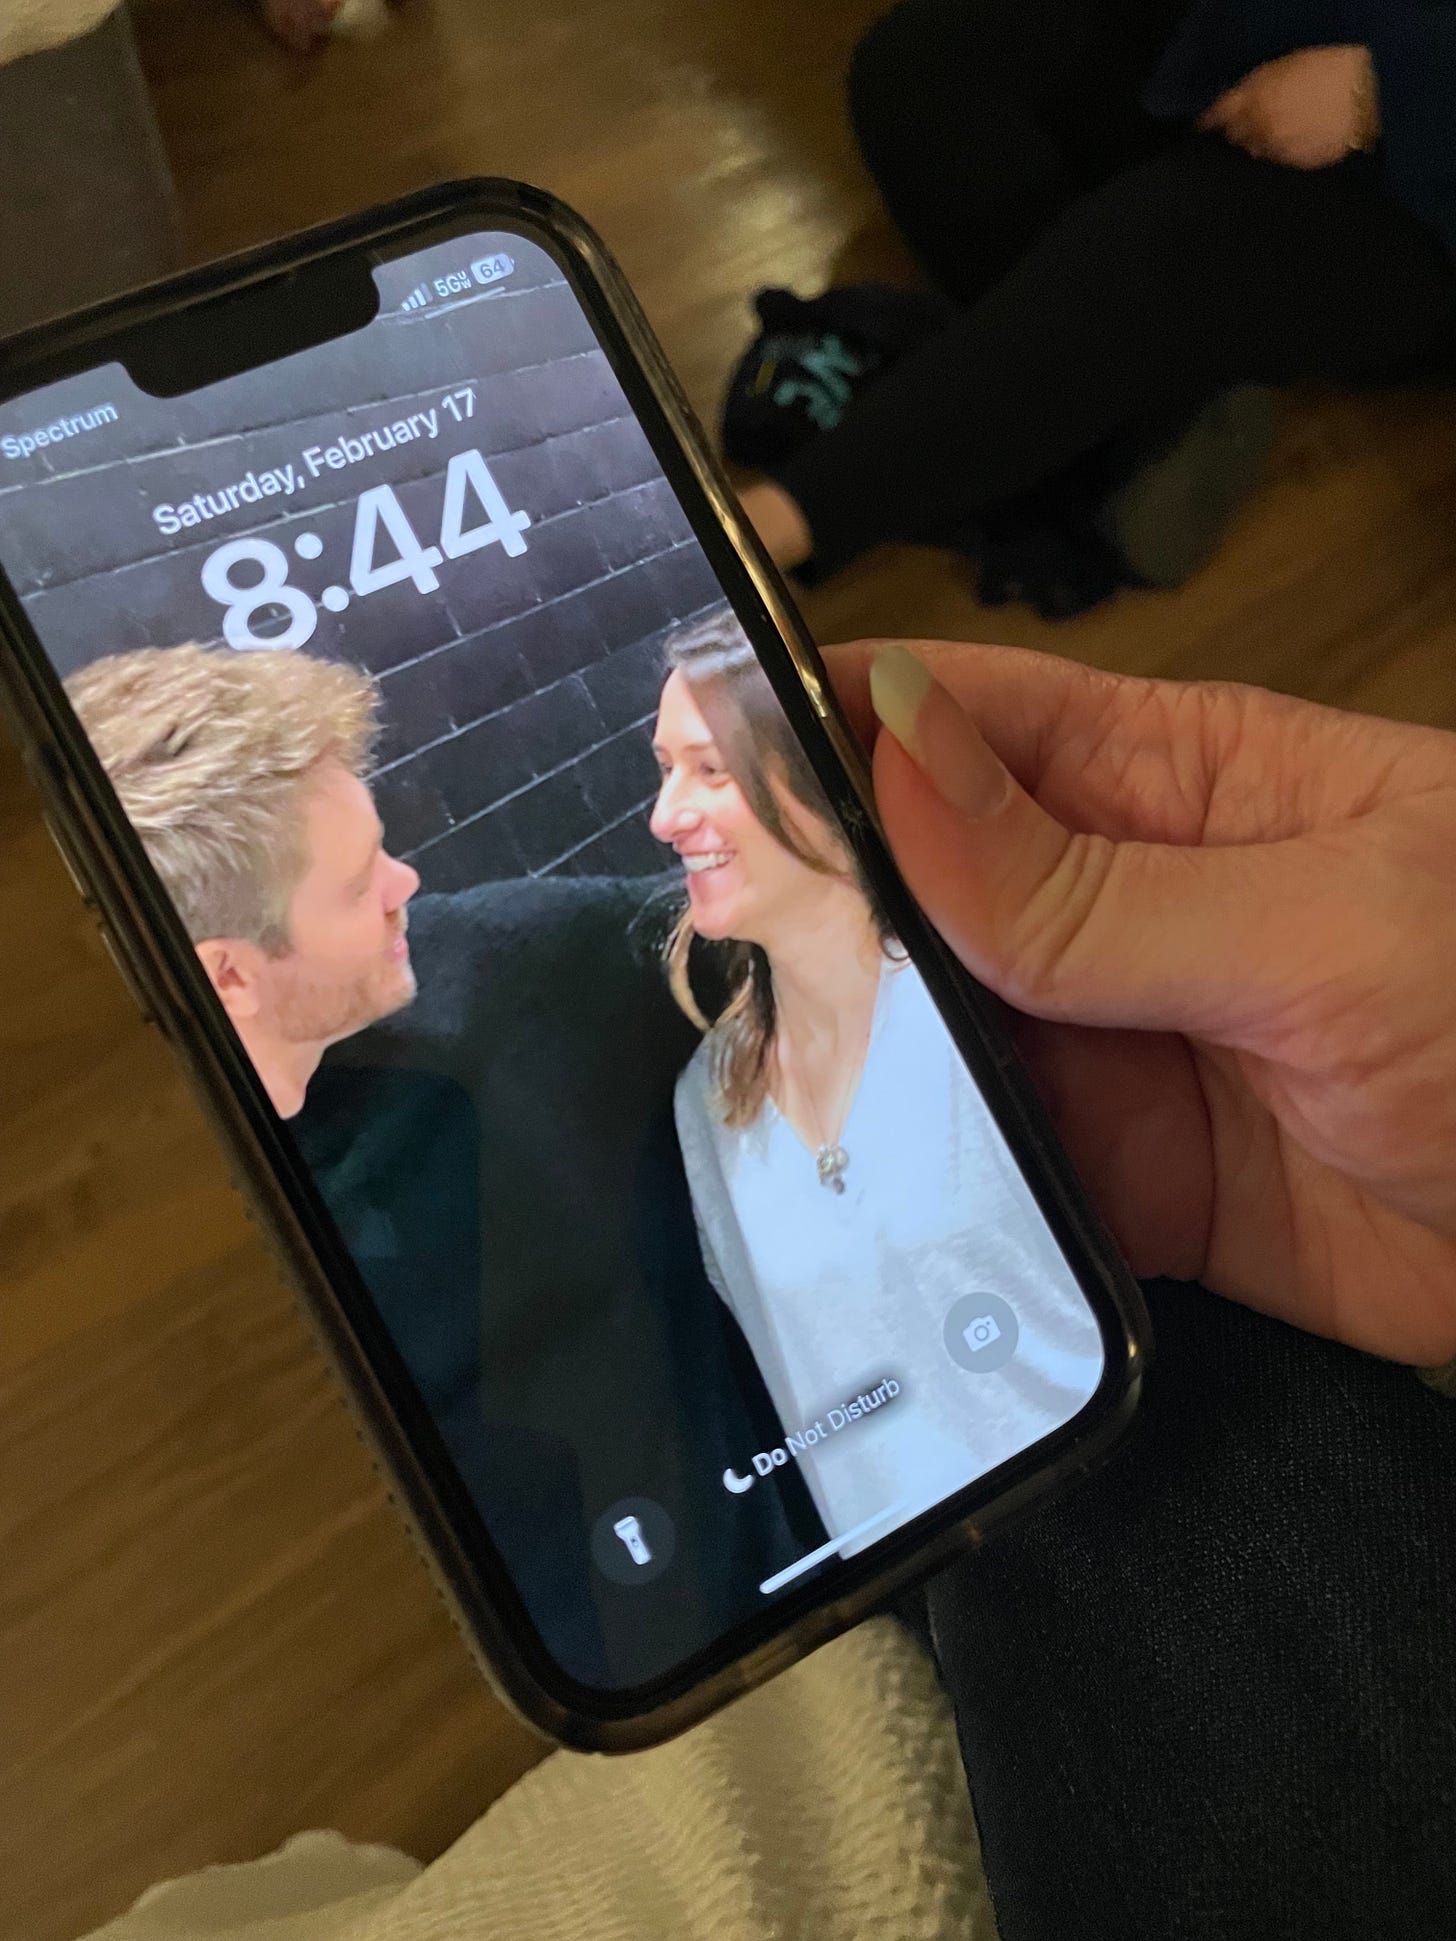 Photo of my phone, which shows a lock screen of Chad Michael Murray looking at my friend Megan Brown in a very romantic way!